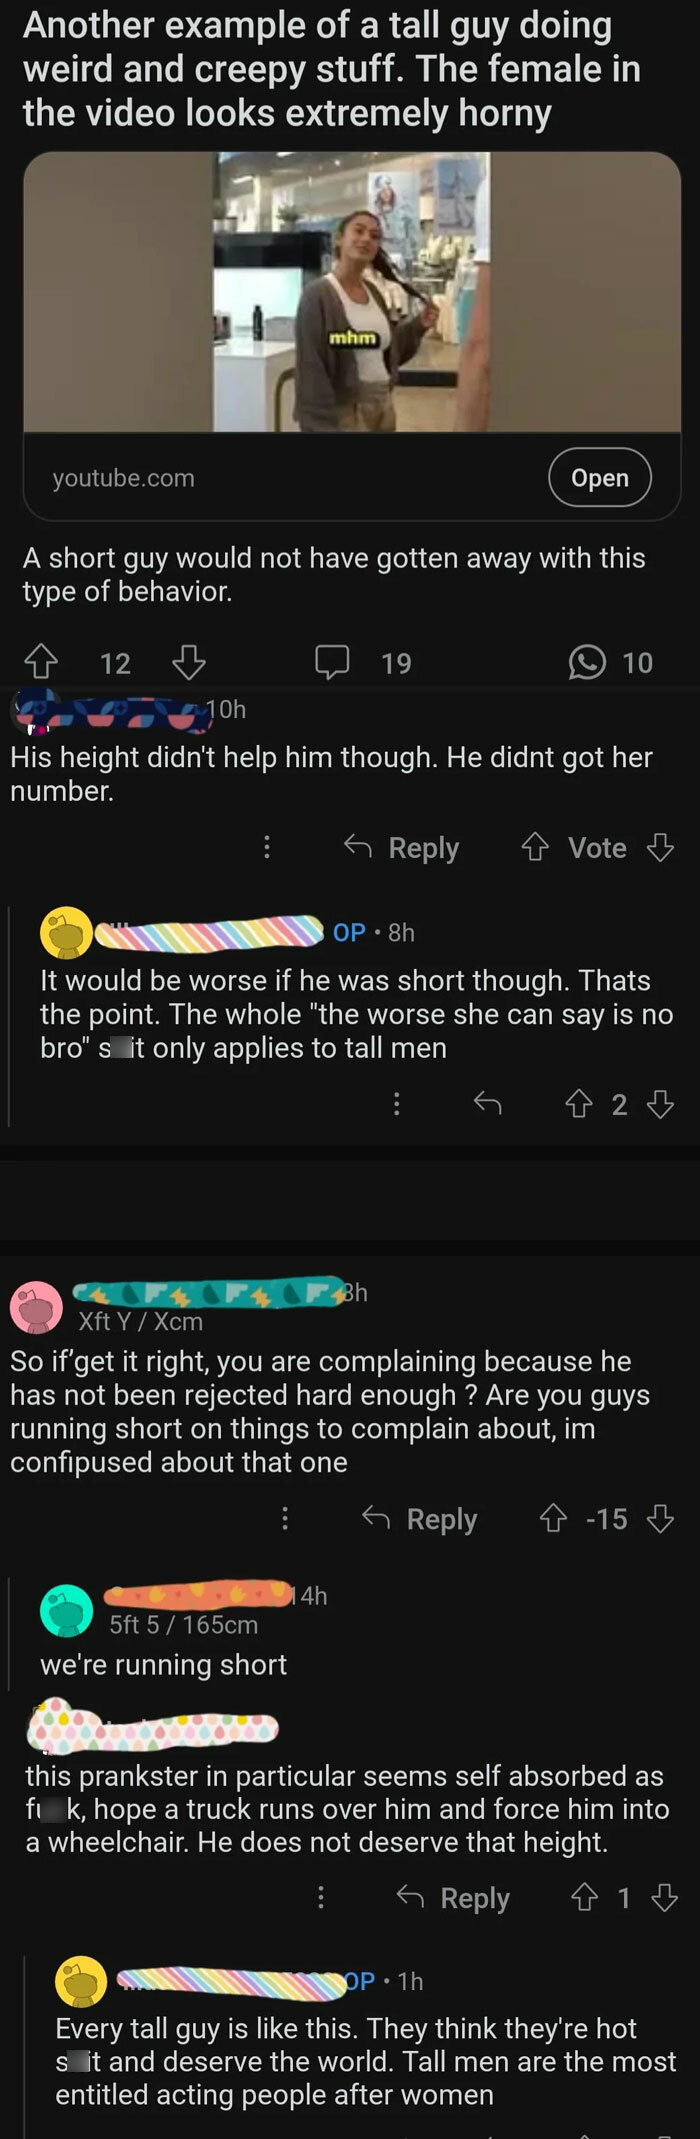 A Very Normal Discussion About "Females" And Tall Men